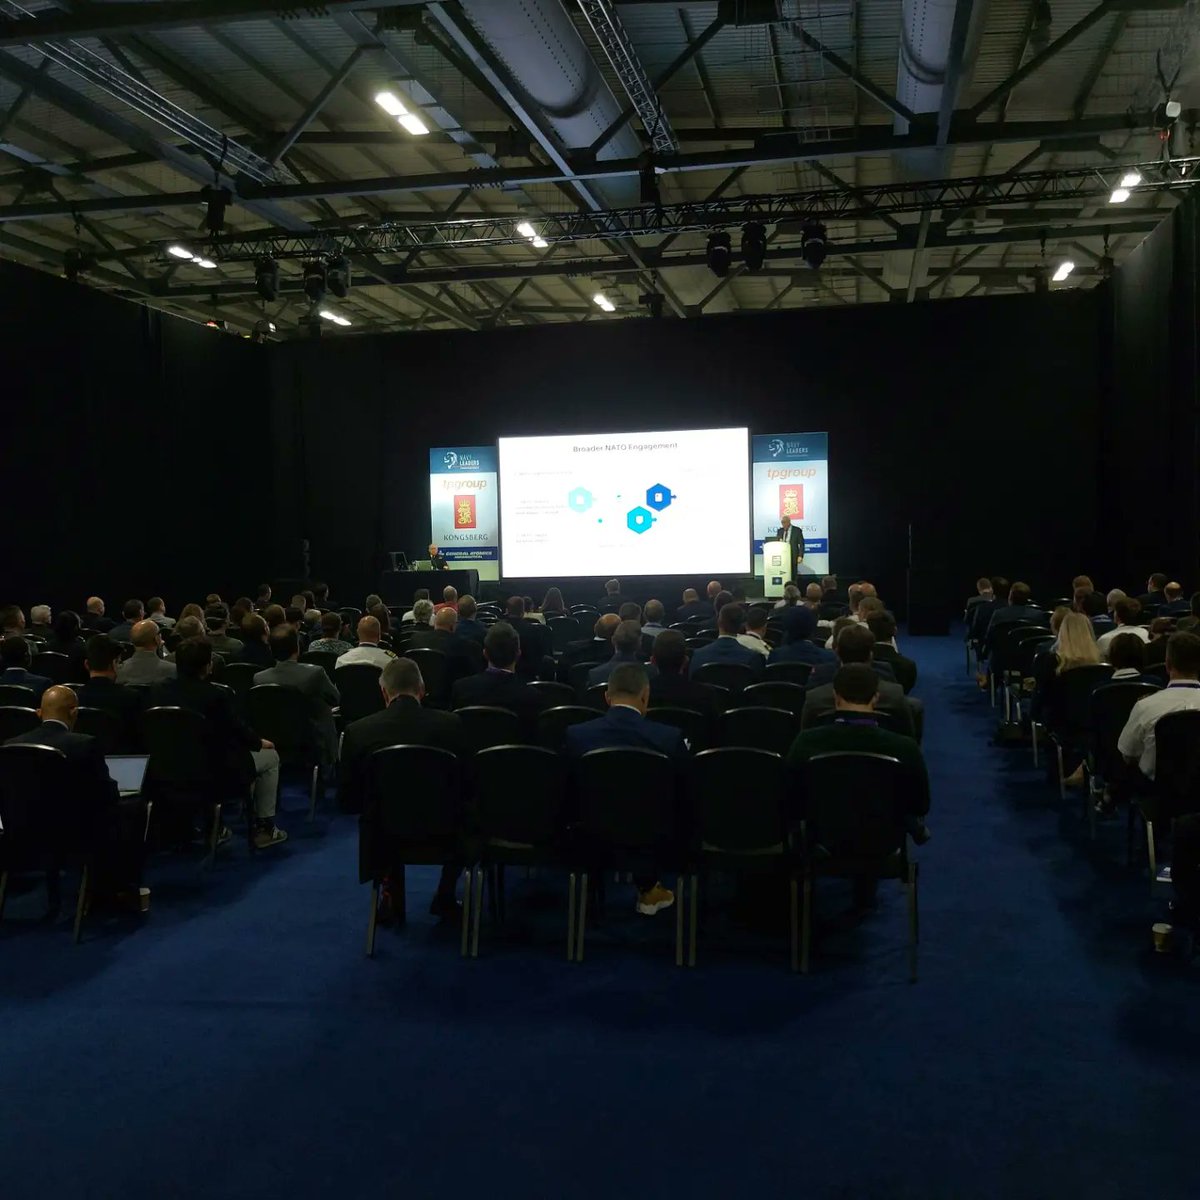 It's Day 2 at our Combined Naval Event and the audience now has the option to attend four conference streams - Future Surface Fleet, Underwater Defence & Security A/B, and Submarine Technology. #CNE2022 ⚓ #FSF #UDS #ST